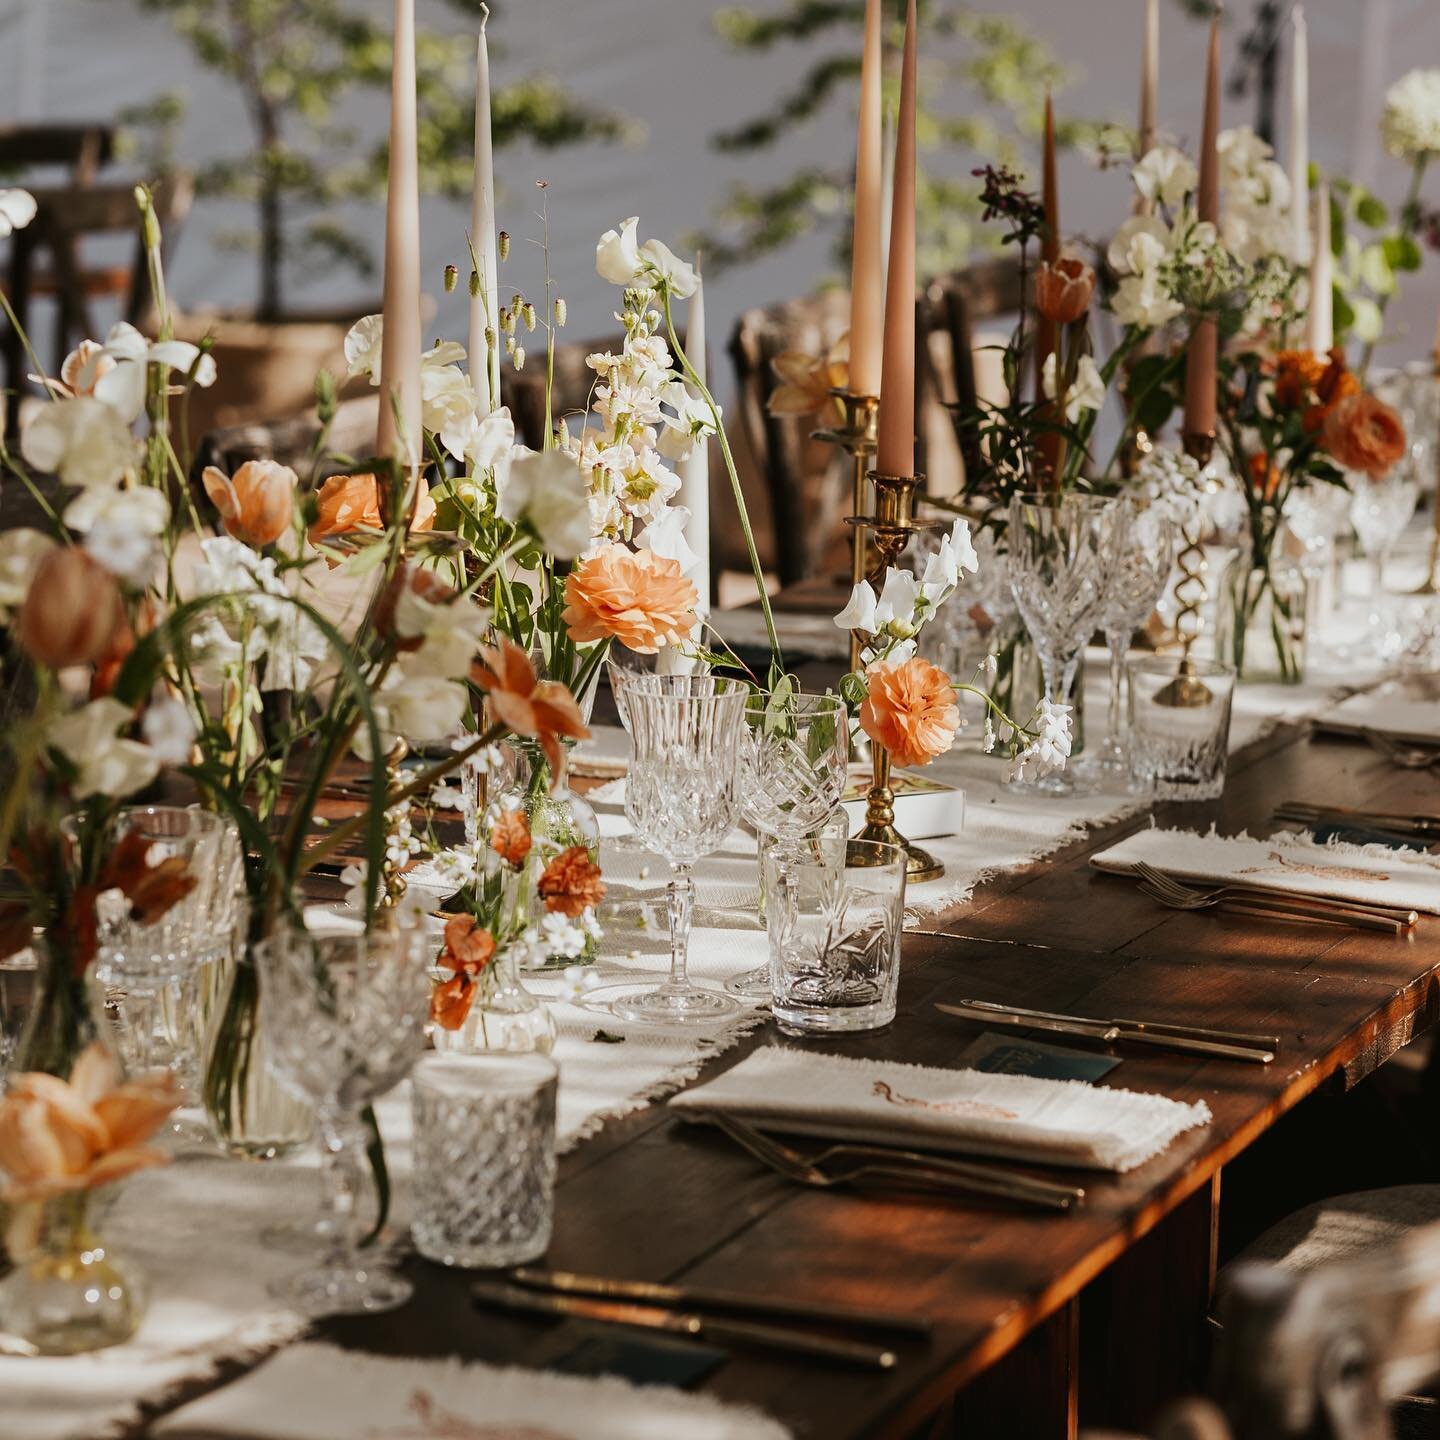 It was all in the detail. 

📷 @colinianross 

#flowerinstallation #weddingfloralstylist #floralstylist #blooms #flowerpower #rainbowflowers #rainbowweddingflowers #flowerstagram #flowerstyle #stylist #styleinspo #joy #tablescape #tablescapes #tables